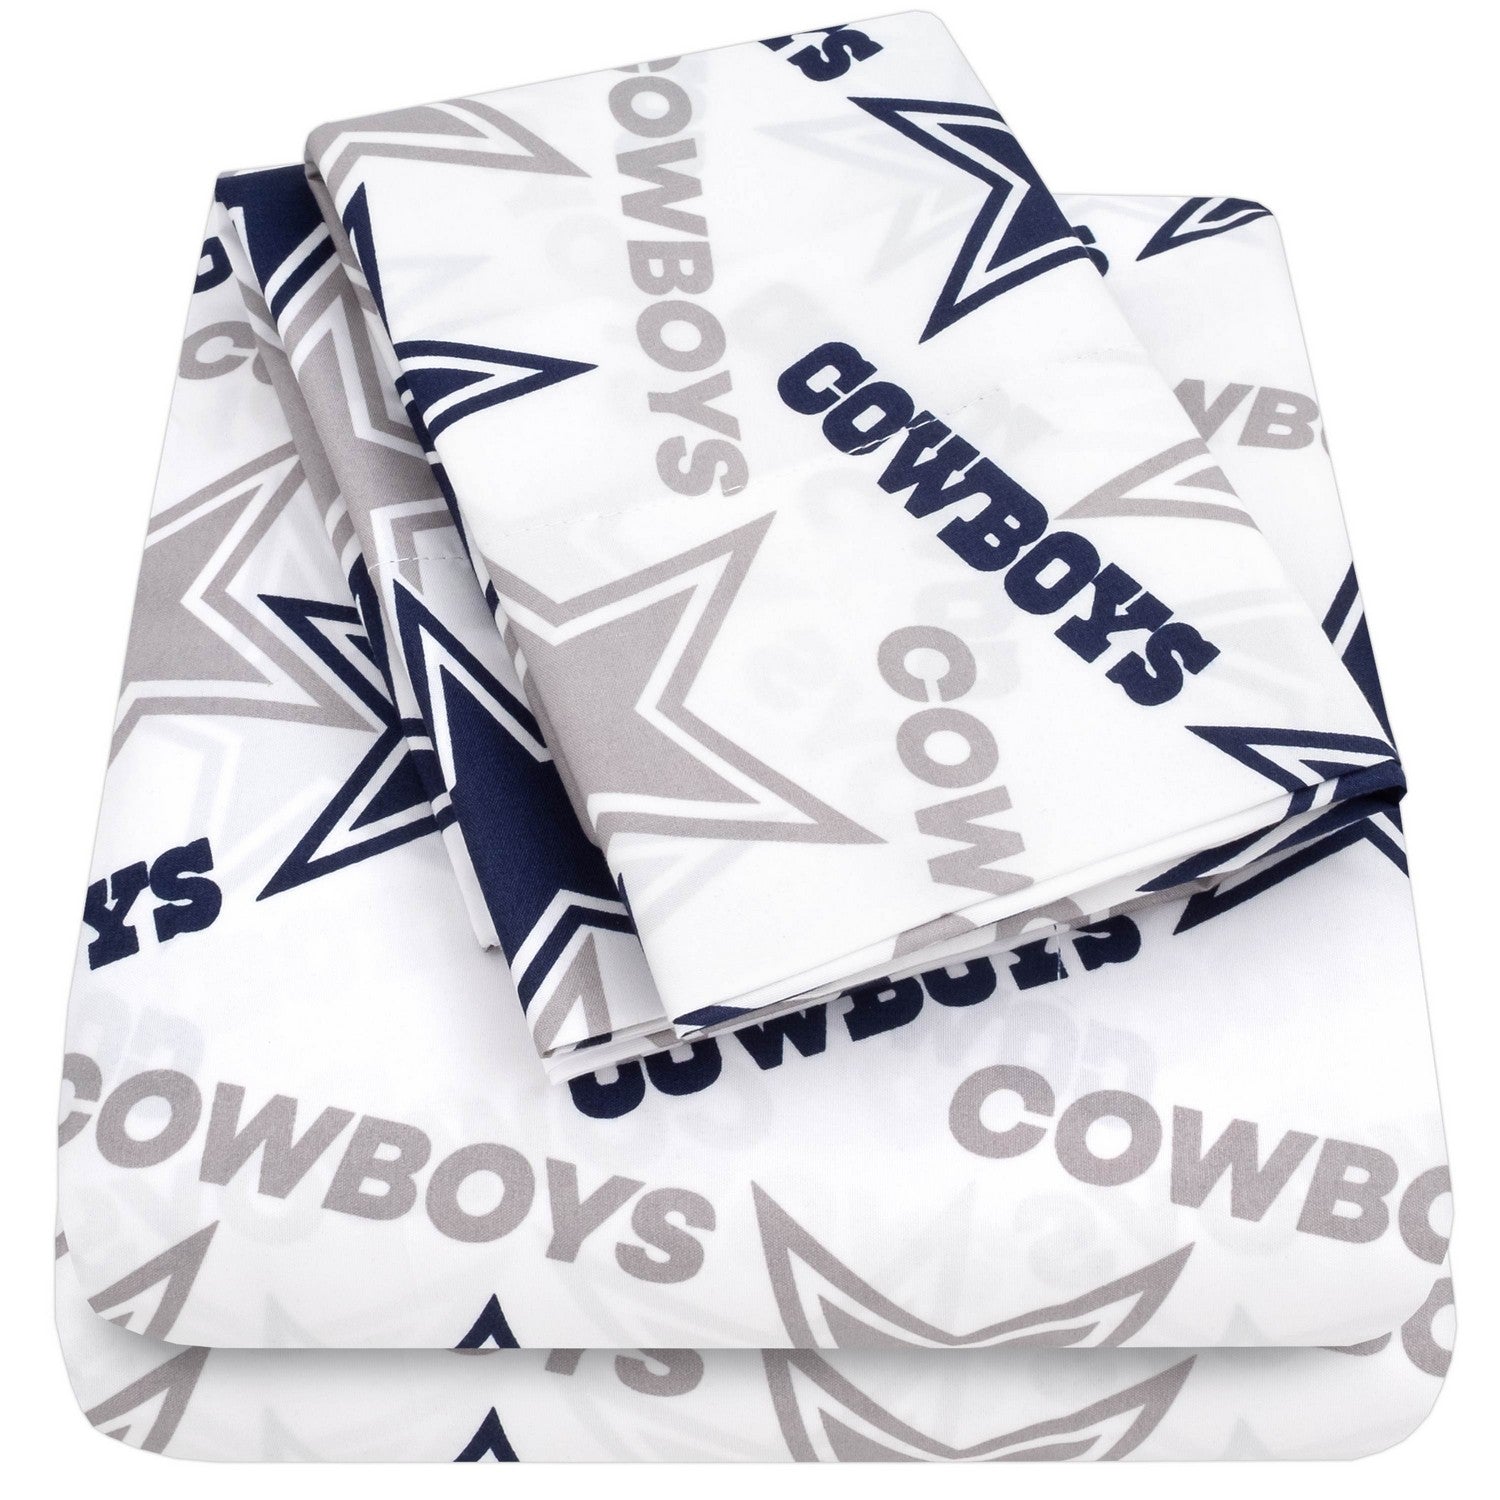 Dallas Cowboys NFL Officially Licensed 4-Piece Sheet Set - Folded